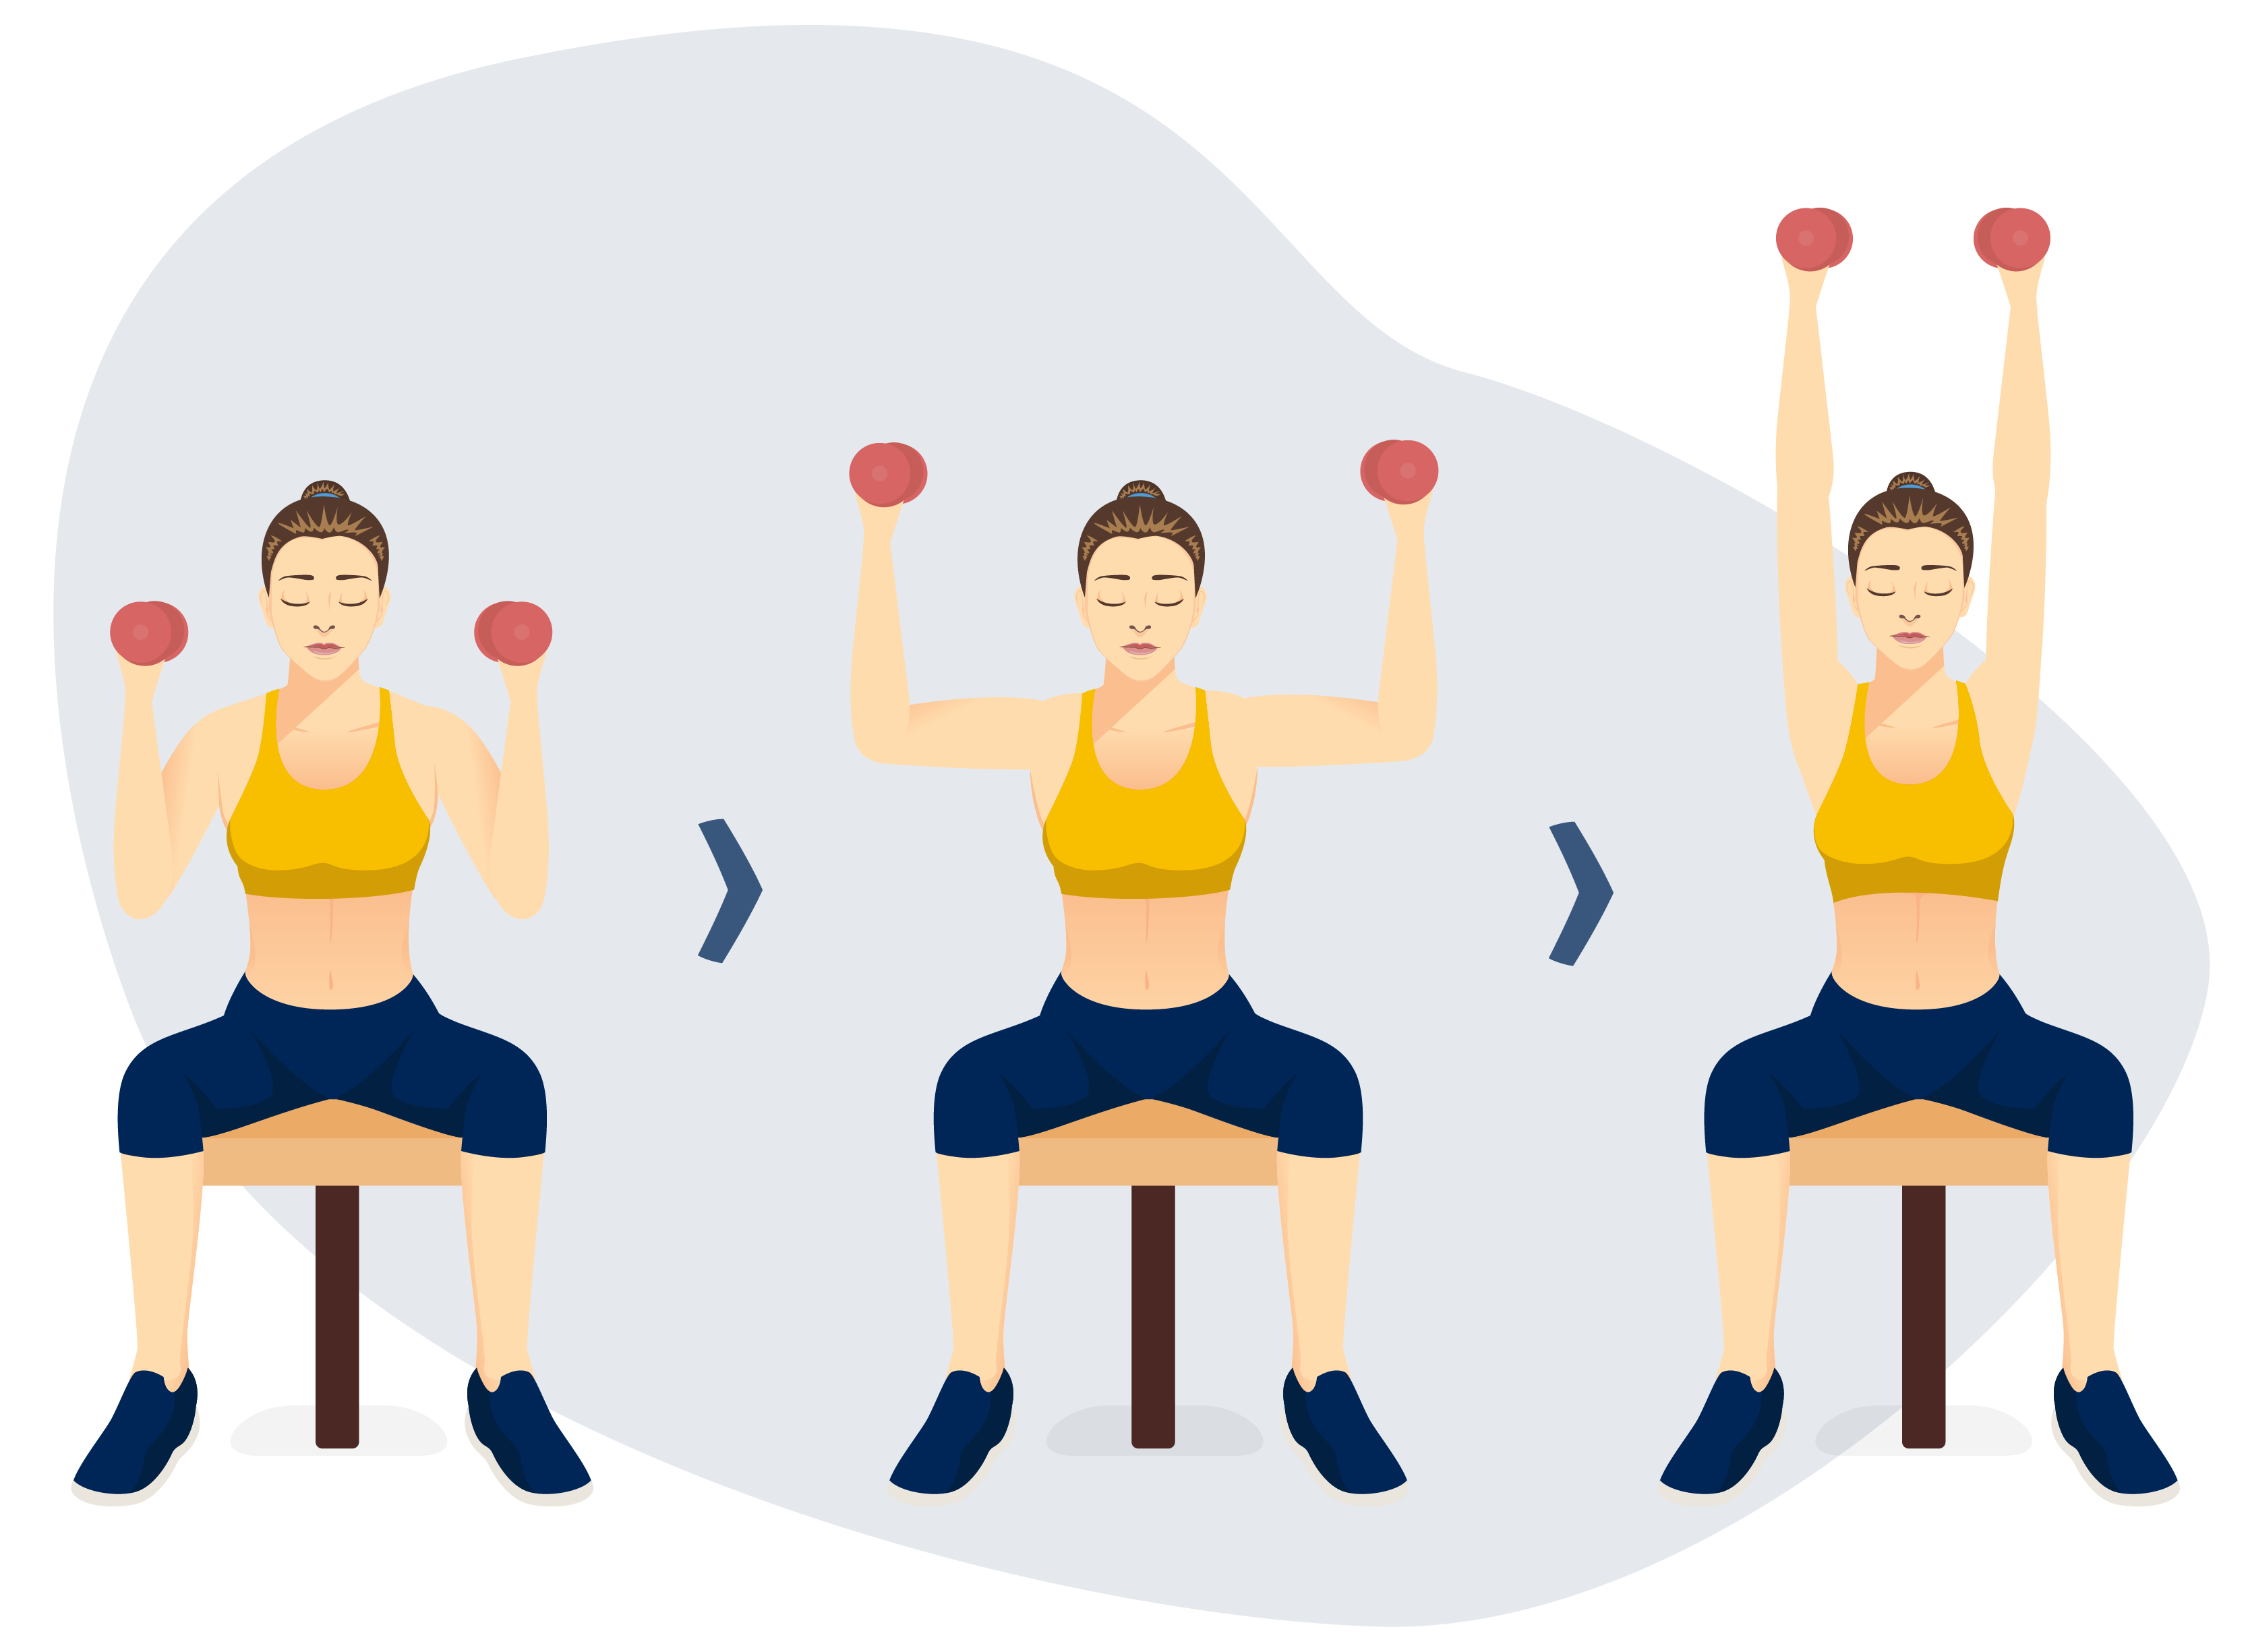 Shoulder press exercise – person is seated on chair with arms bent and thumbs resting on shoulders. Person presses arms straight up. Person lower arms down with control and repeats.